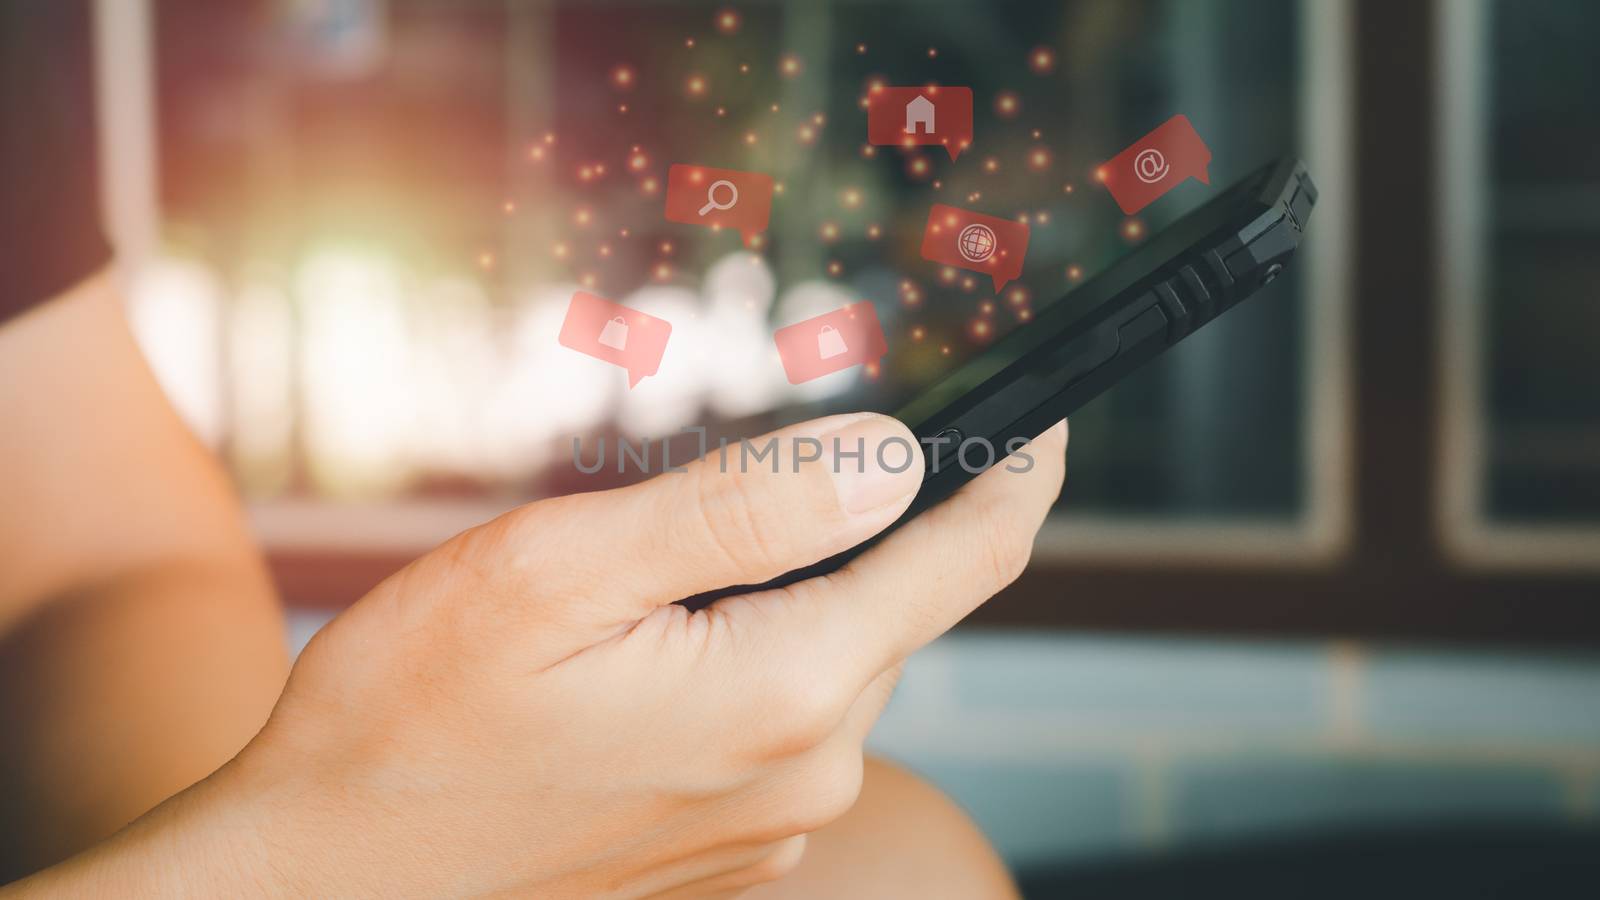 Social media with smartphone concept. Hand holding black mobile phone with red icon of applications, internet marketing, e-learning, and shopping online.